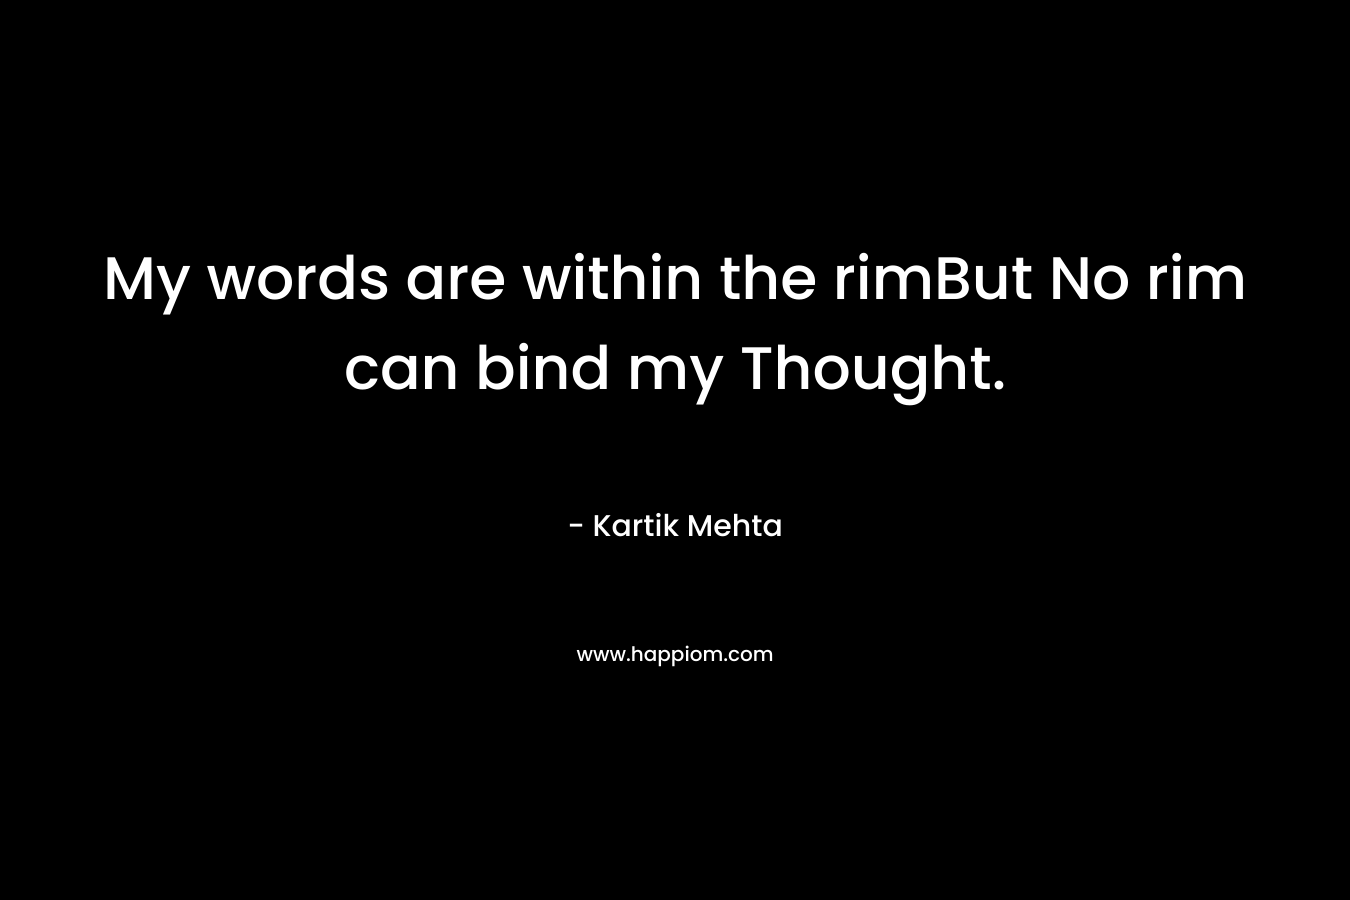 My words are within the rimBut No rim can bind my Thought. – Kartik Mehta